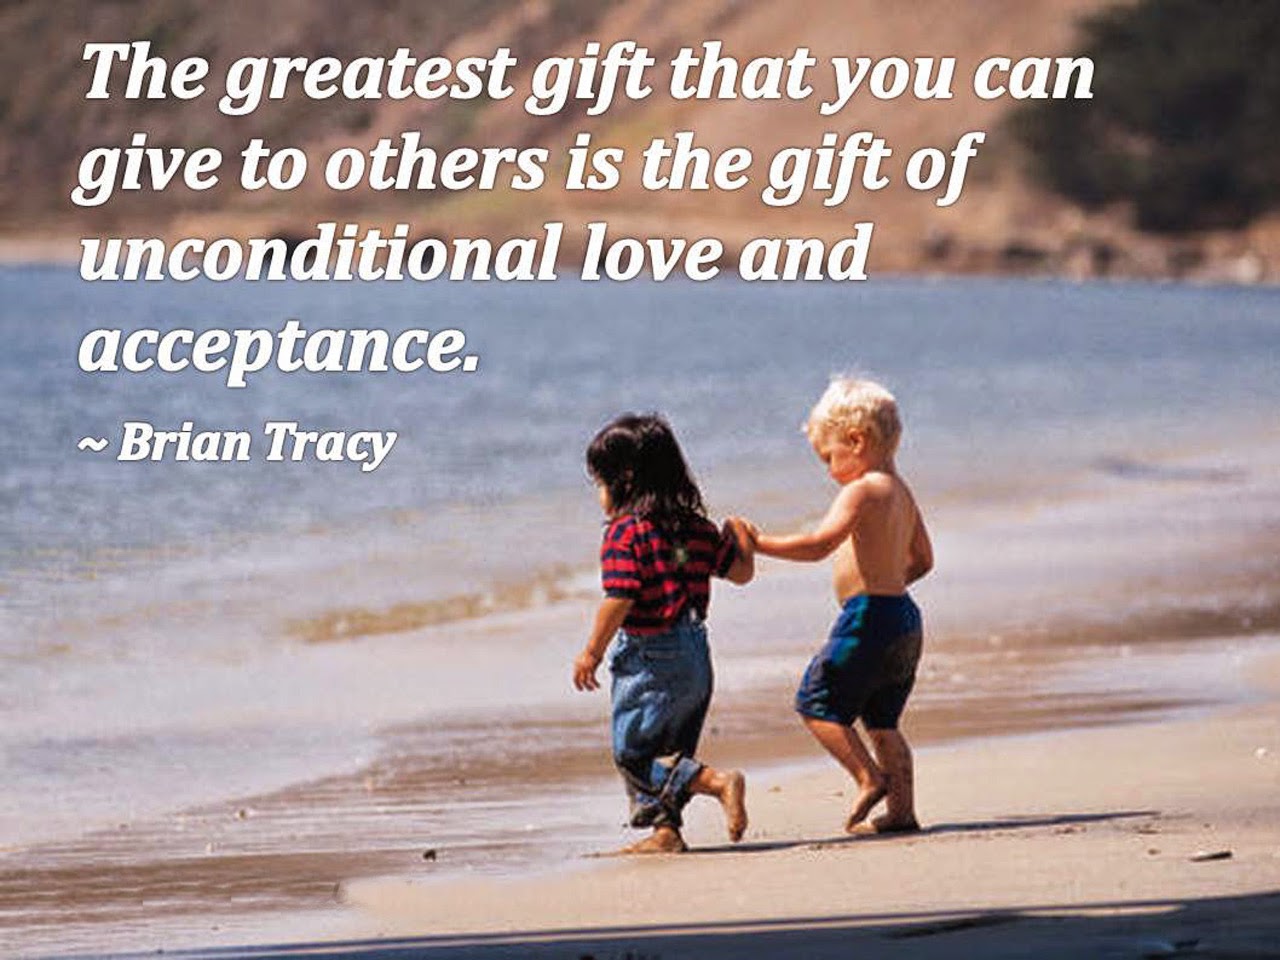 "The greatest t that you can give to others is the